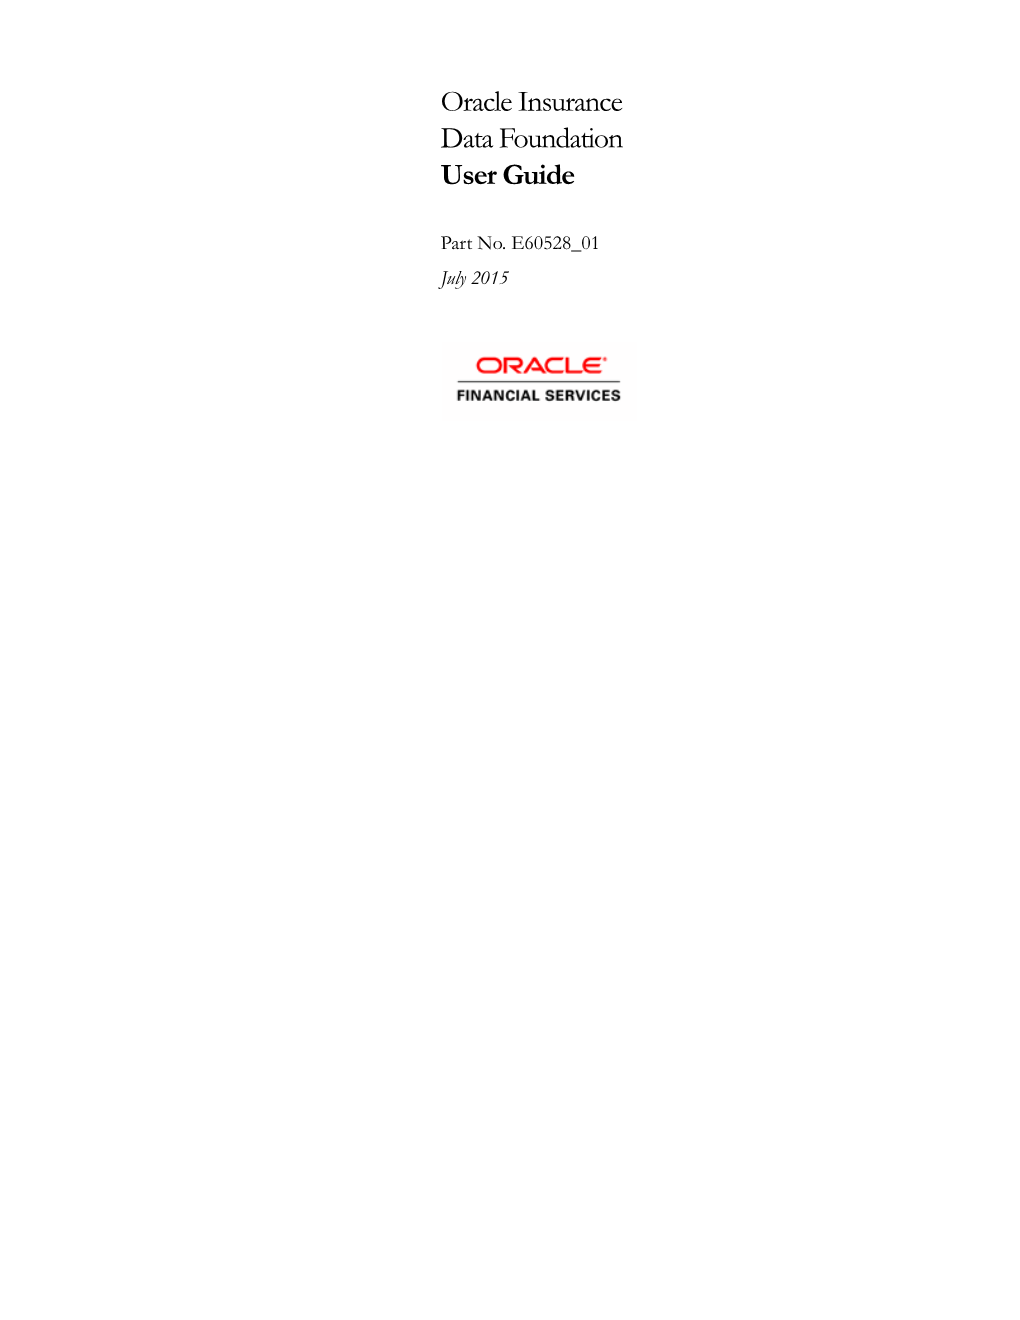 Oracle Insurance Data Foundation User Guide